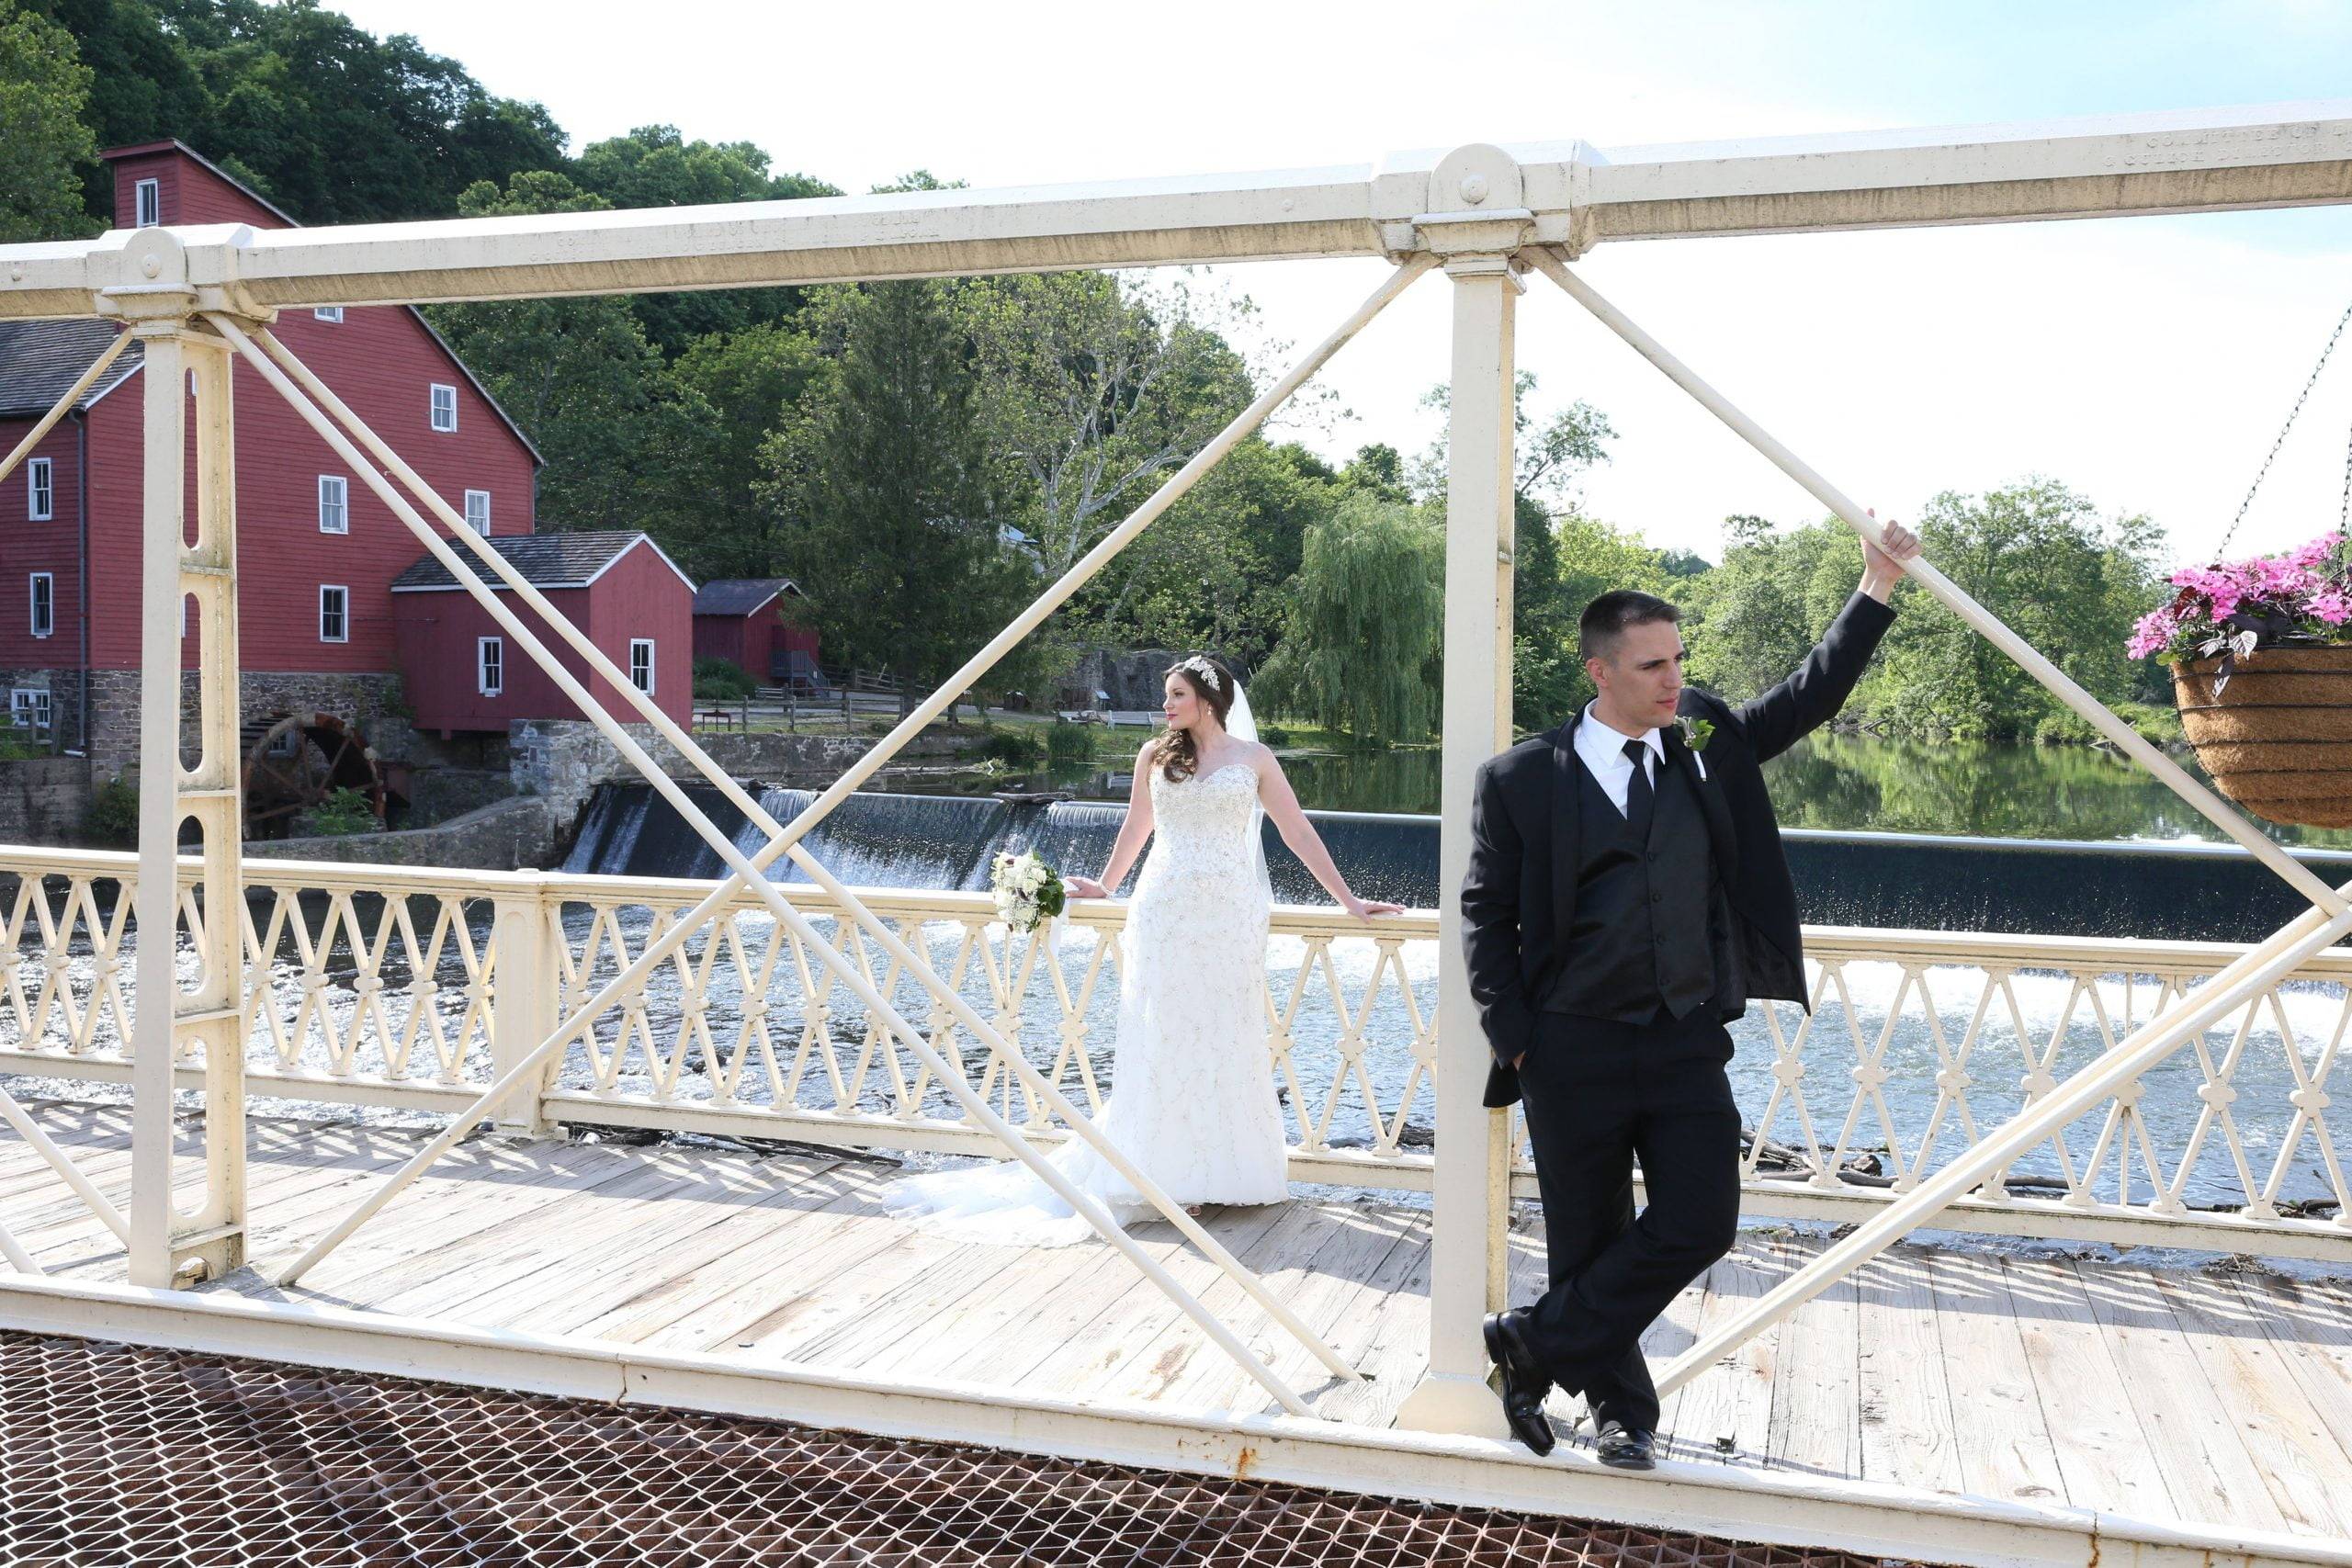 A bride and groom standing on a bridge.